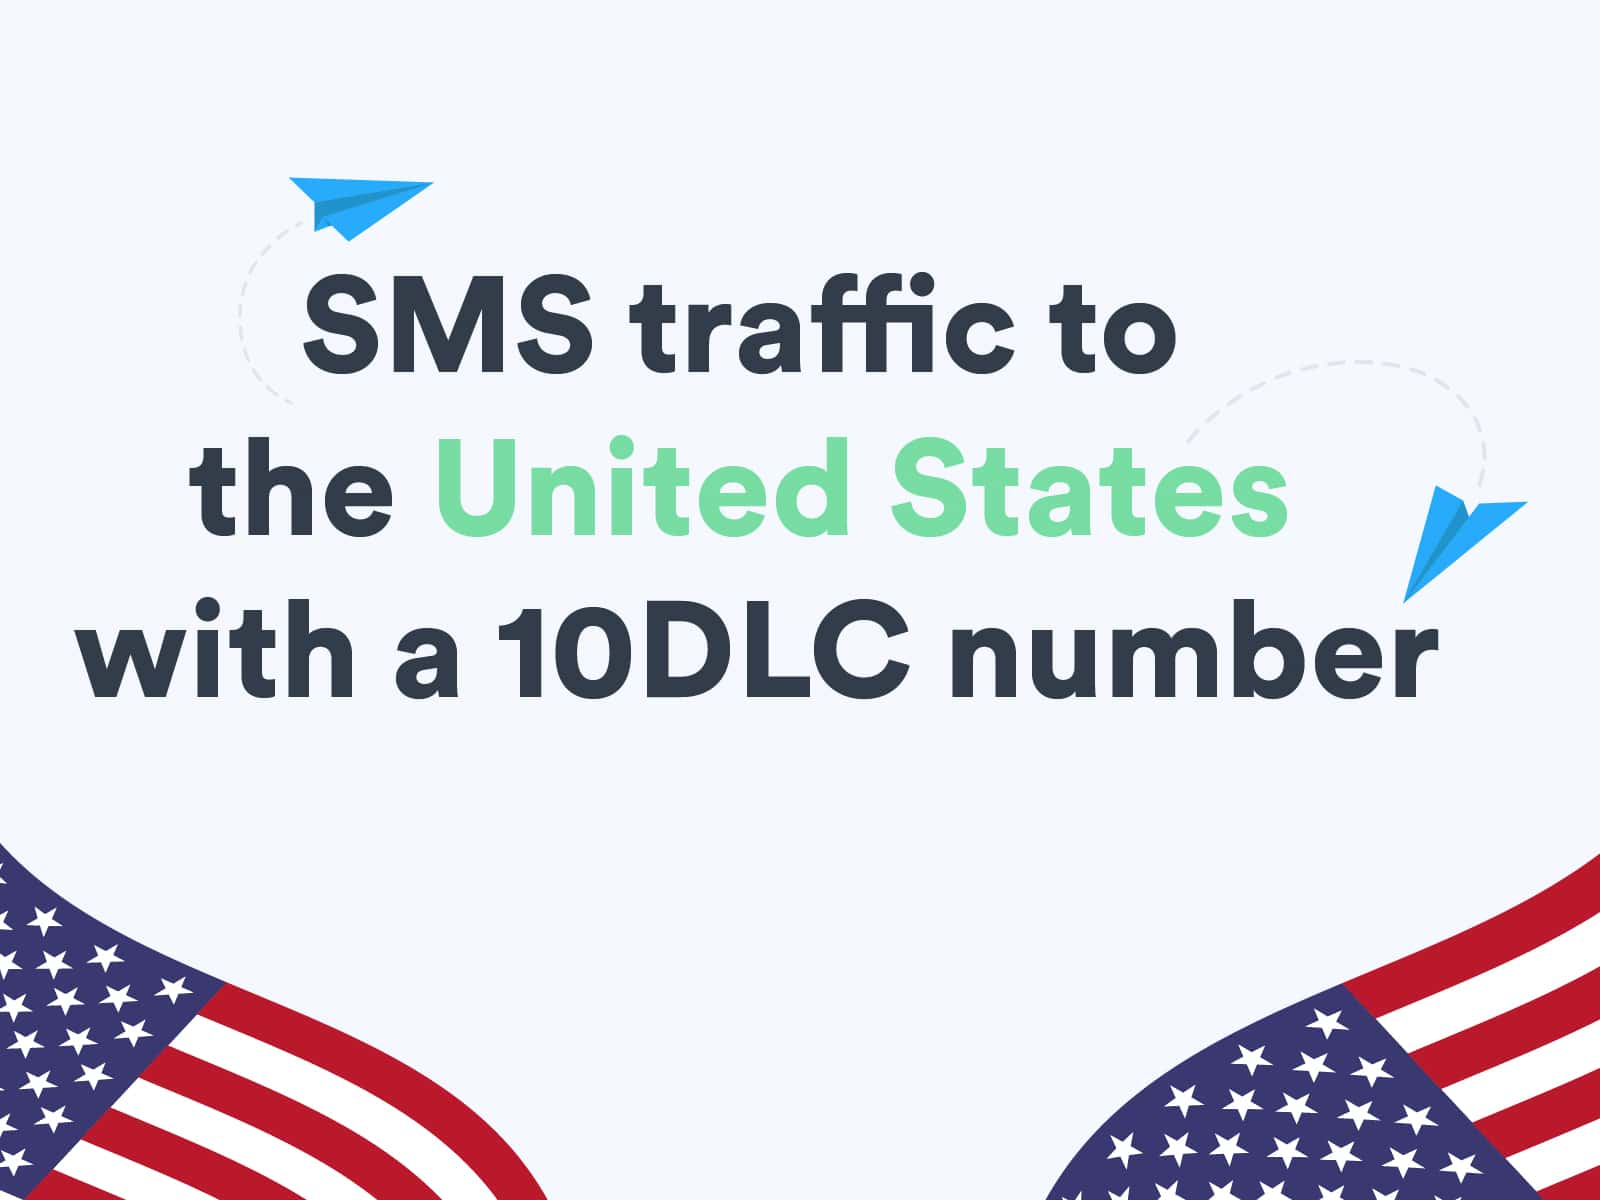 Get Started Sending SMS Traffic to the United States With a 10DLC Number